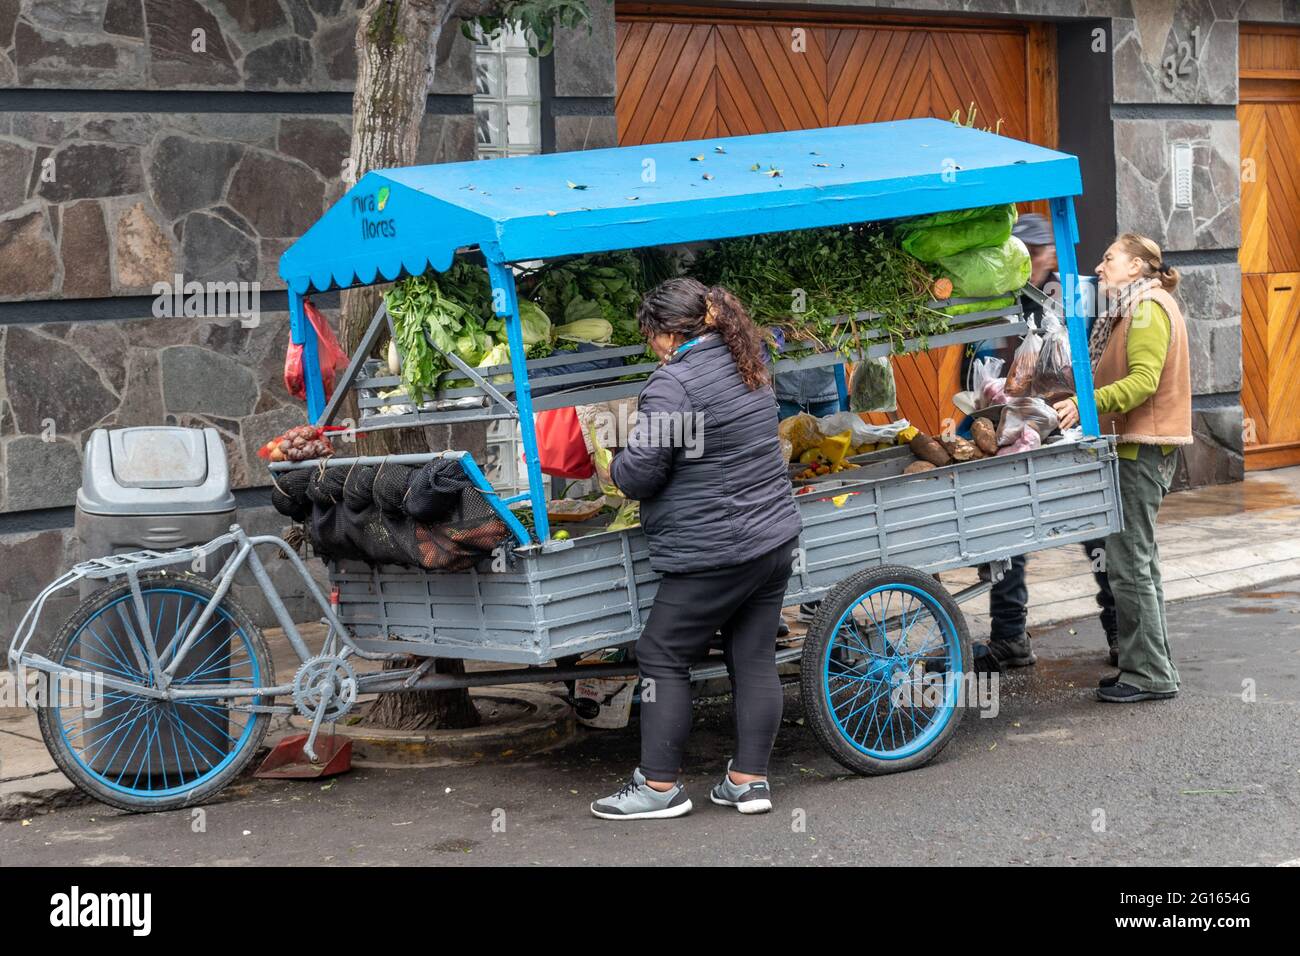 Local residents buying fruit and vegetables from a mobile vendor in Miraflores, Lima, Peru Stock Photo